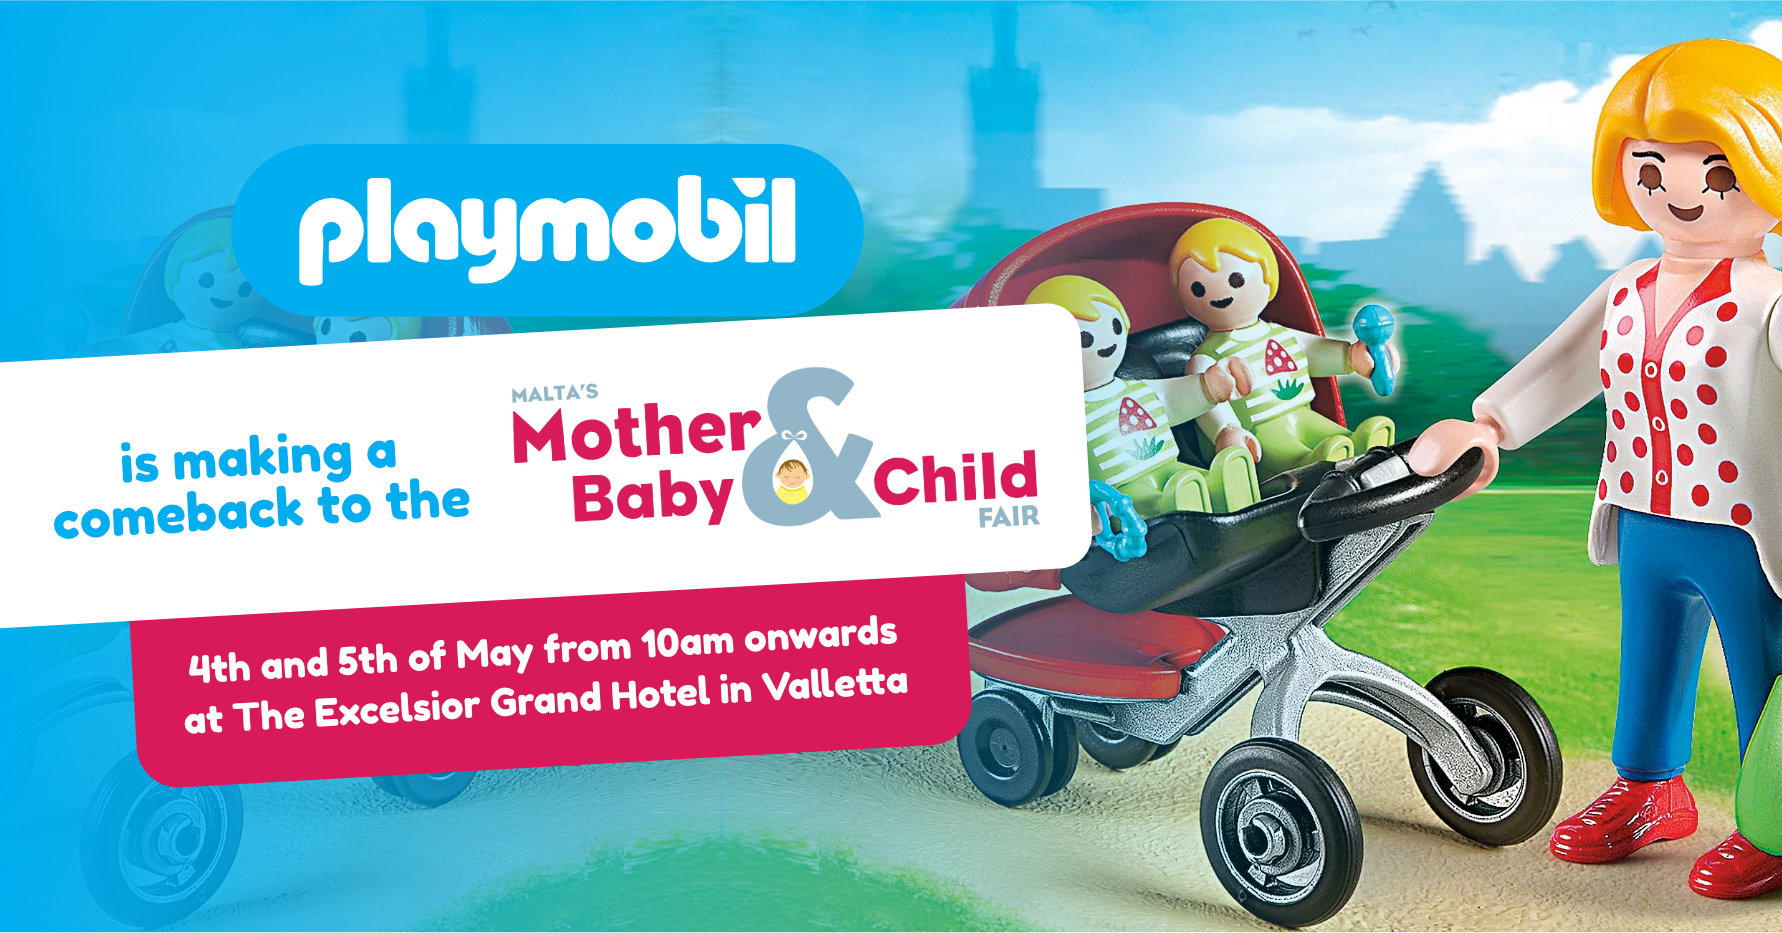 Playmobil at the Malta, baby and child fair